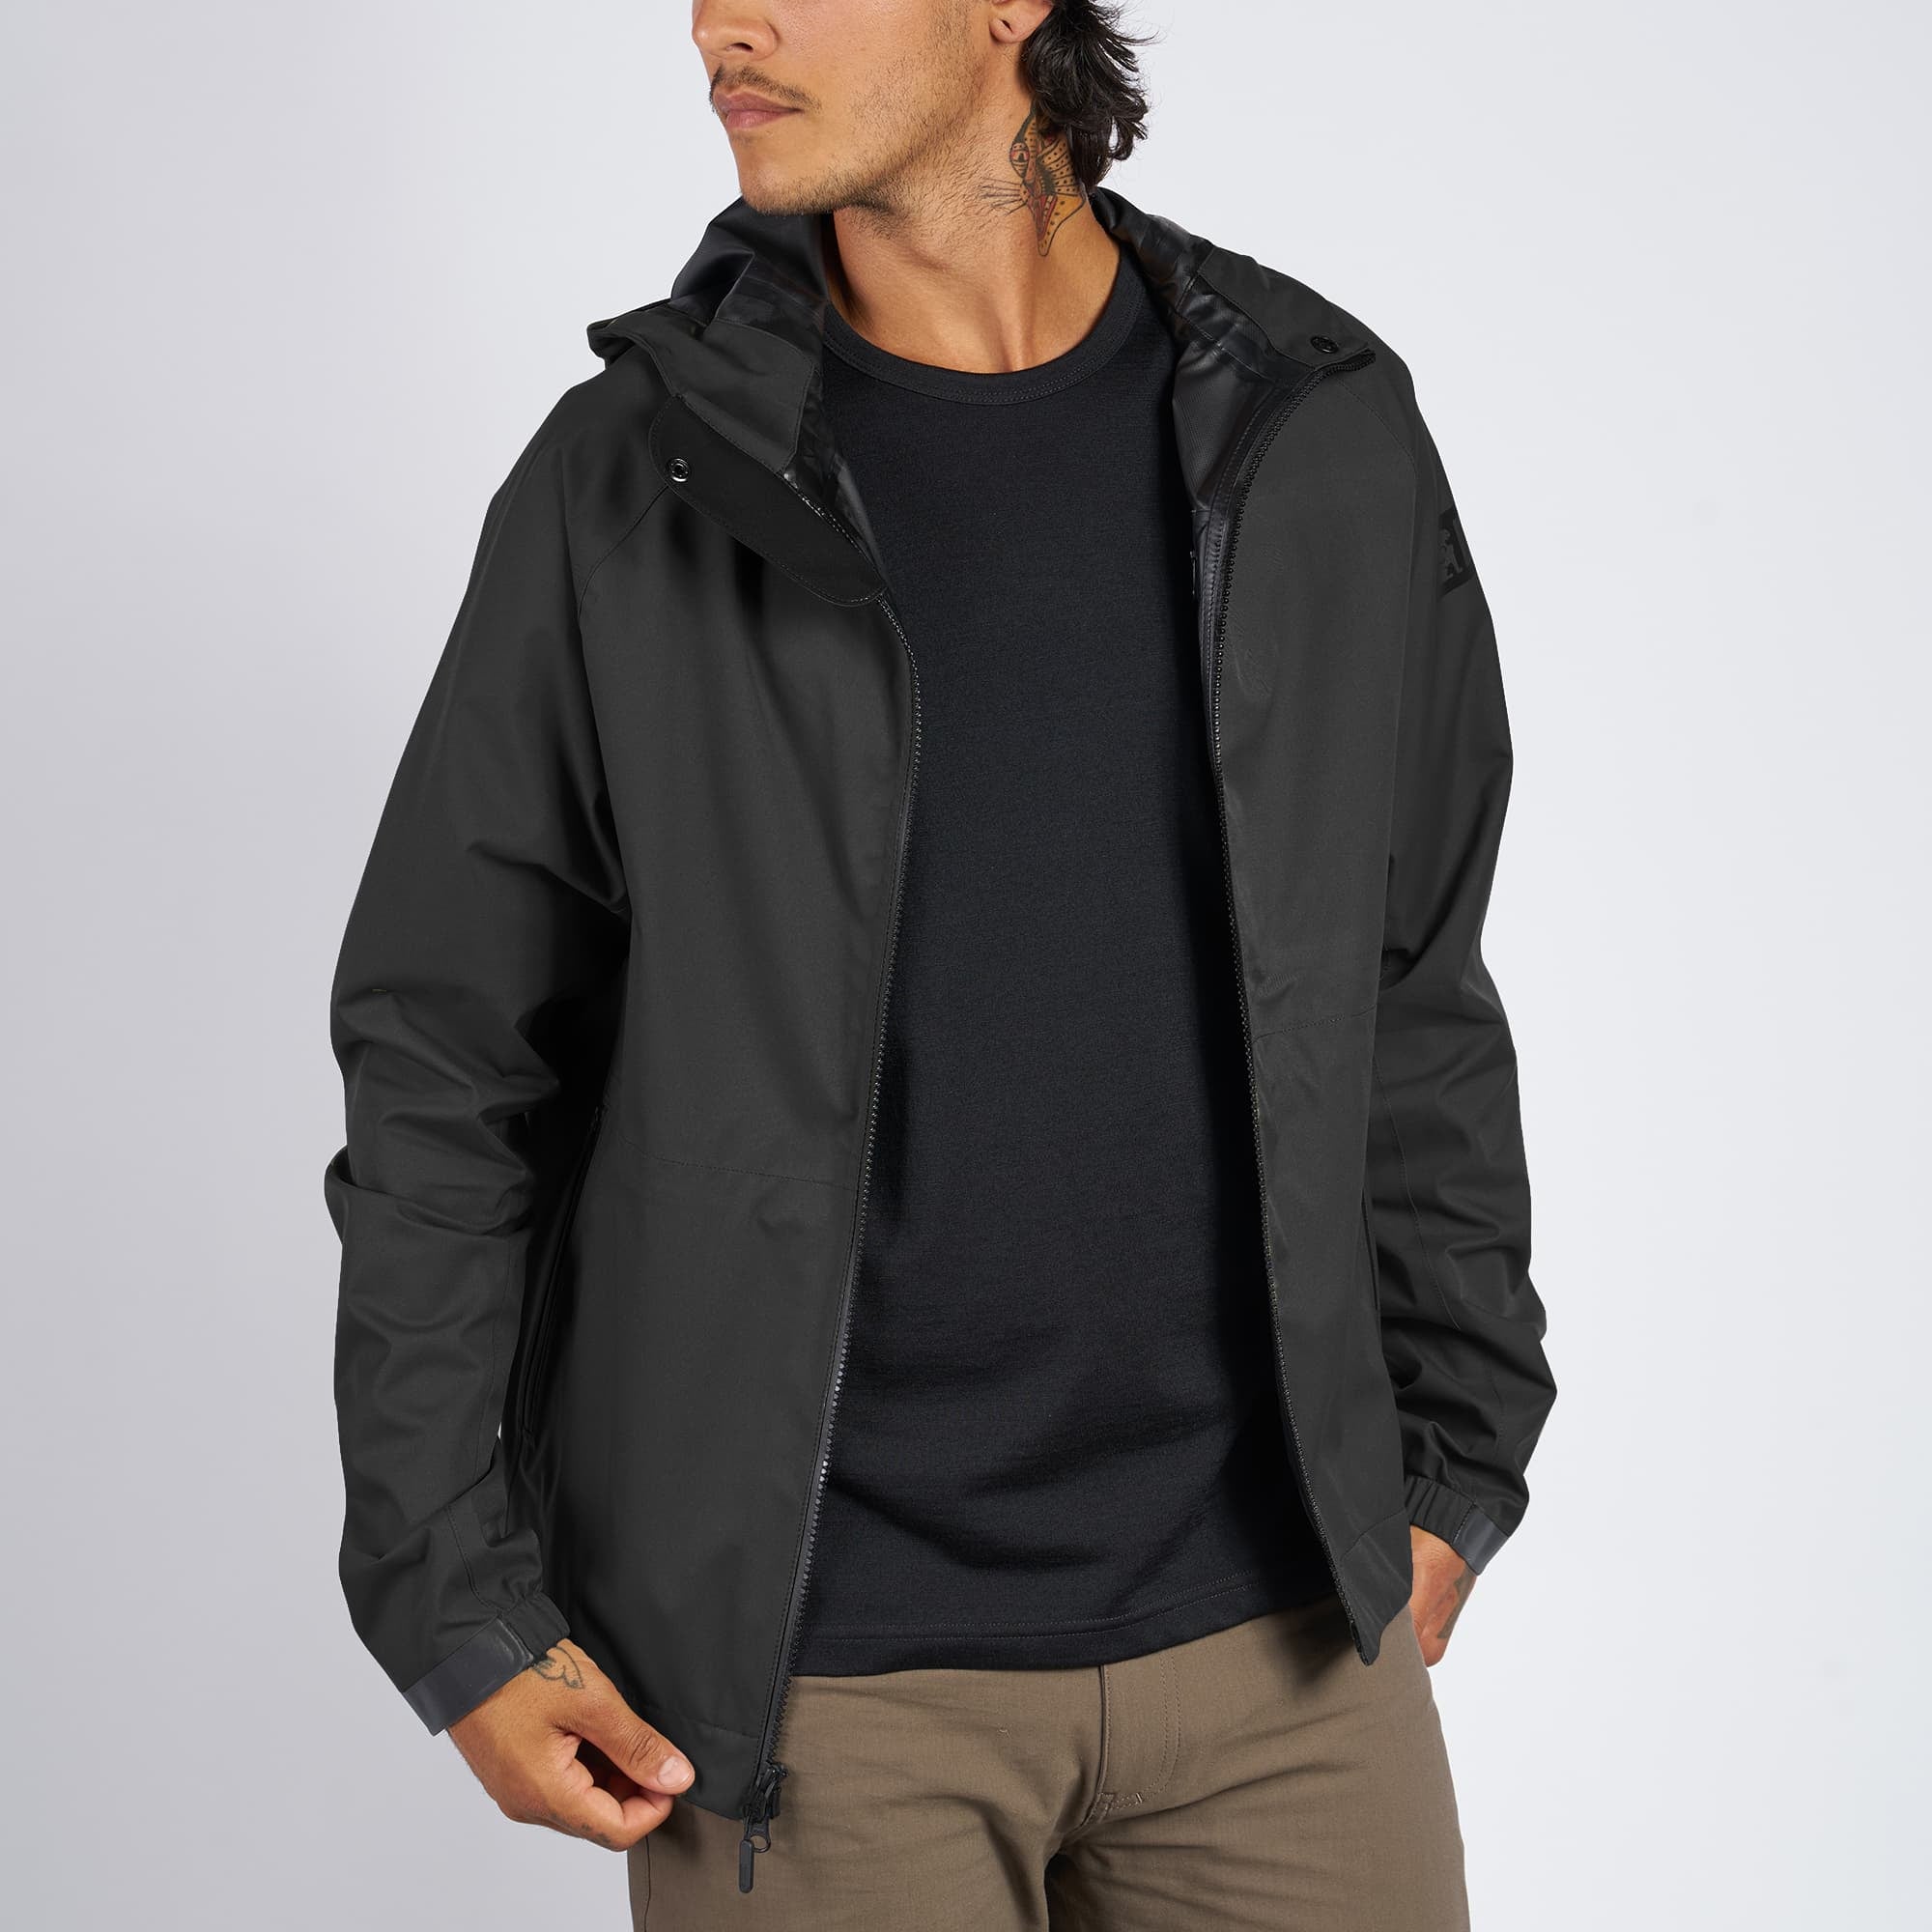 Balance Collection Hooded Full Zip Poncho Workout Athletic Jacket